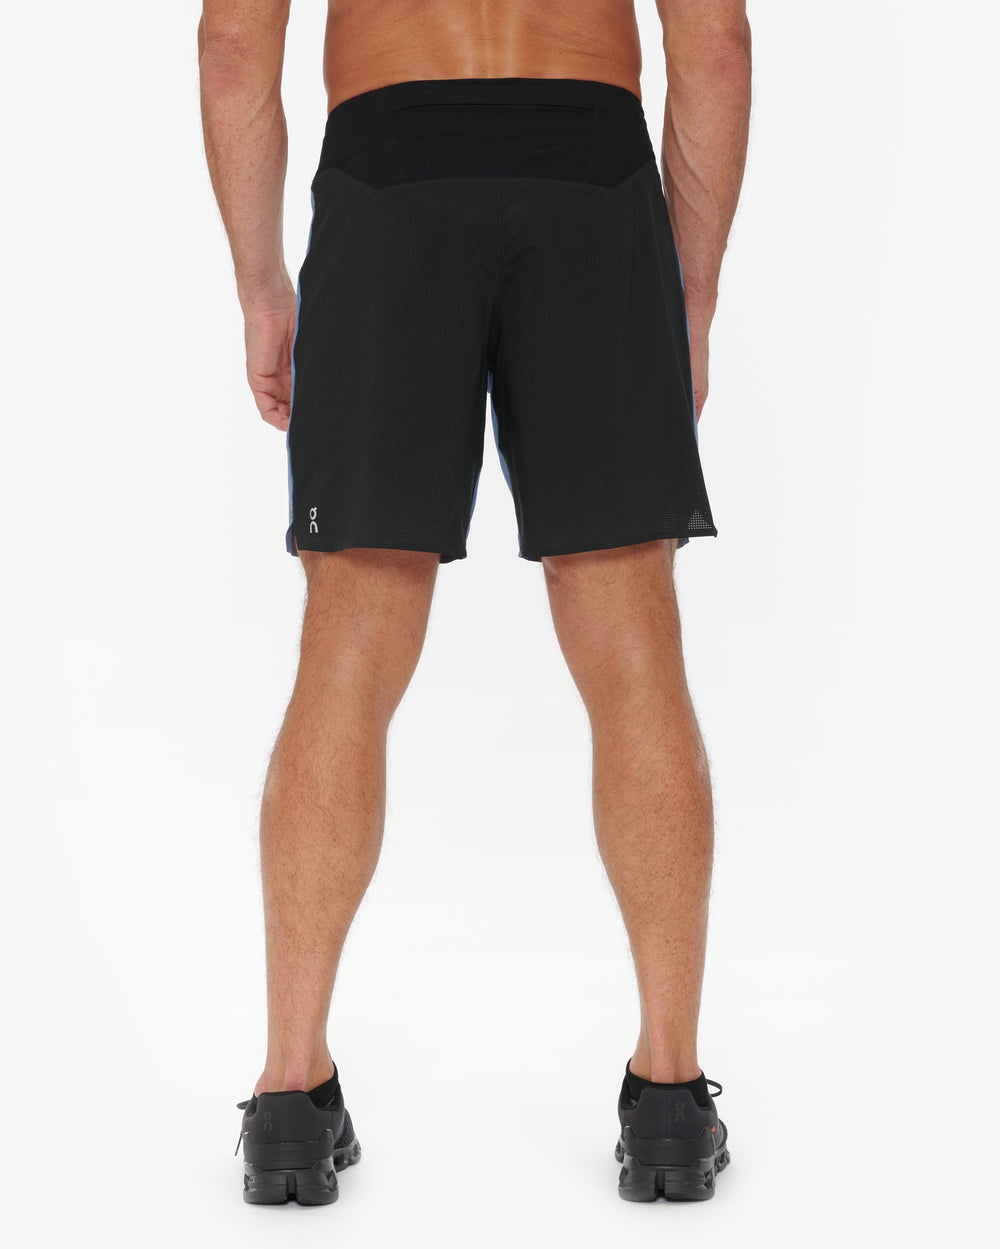 ON LIGHTWEIGHT SHORTS 7" - LINED